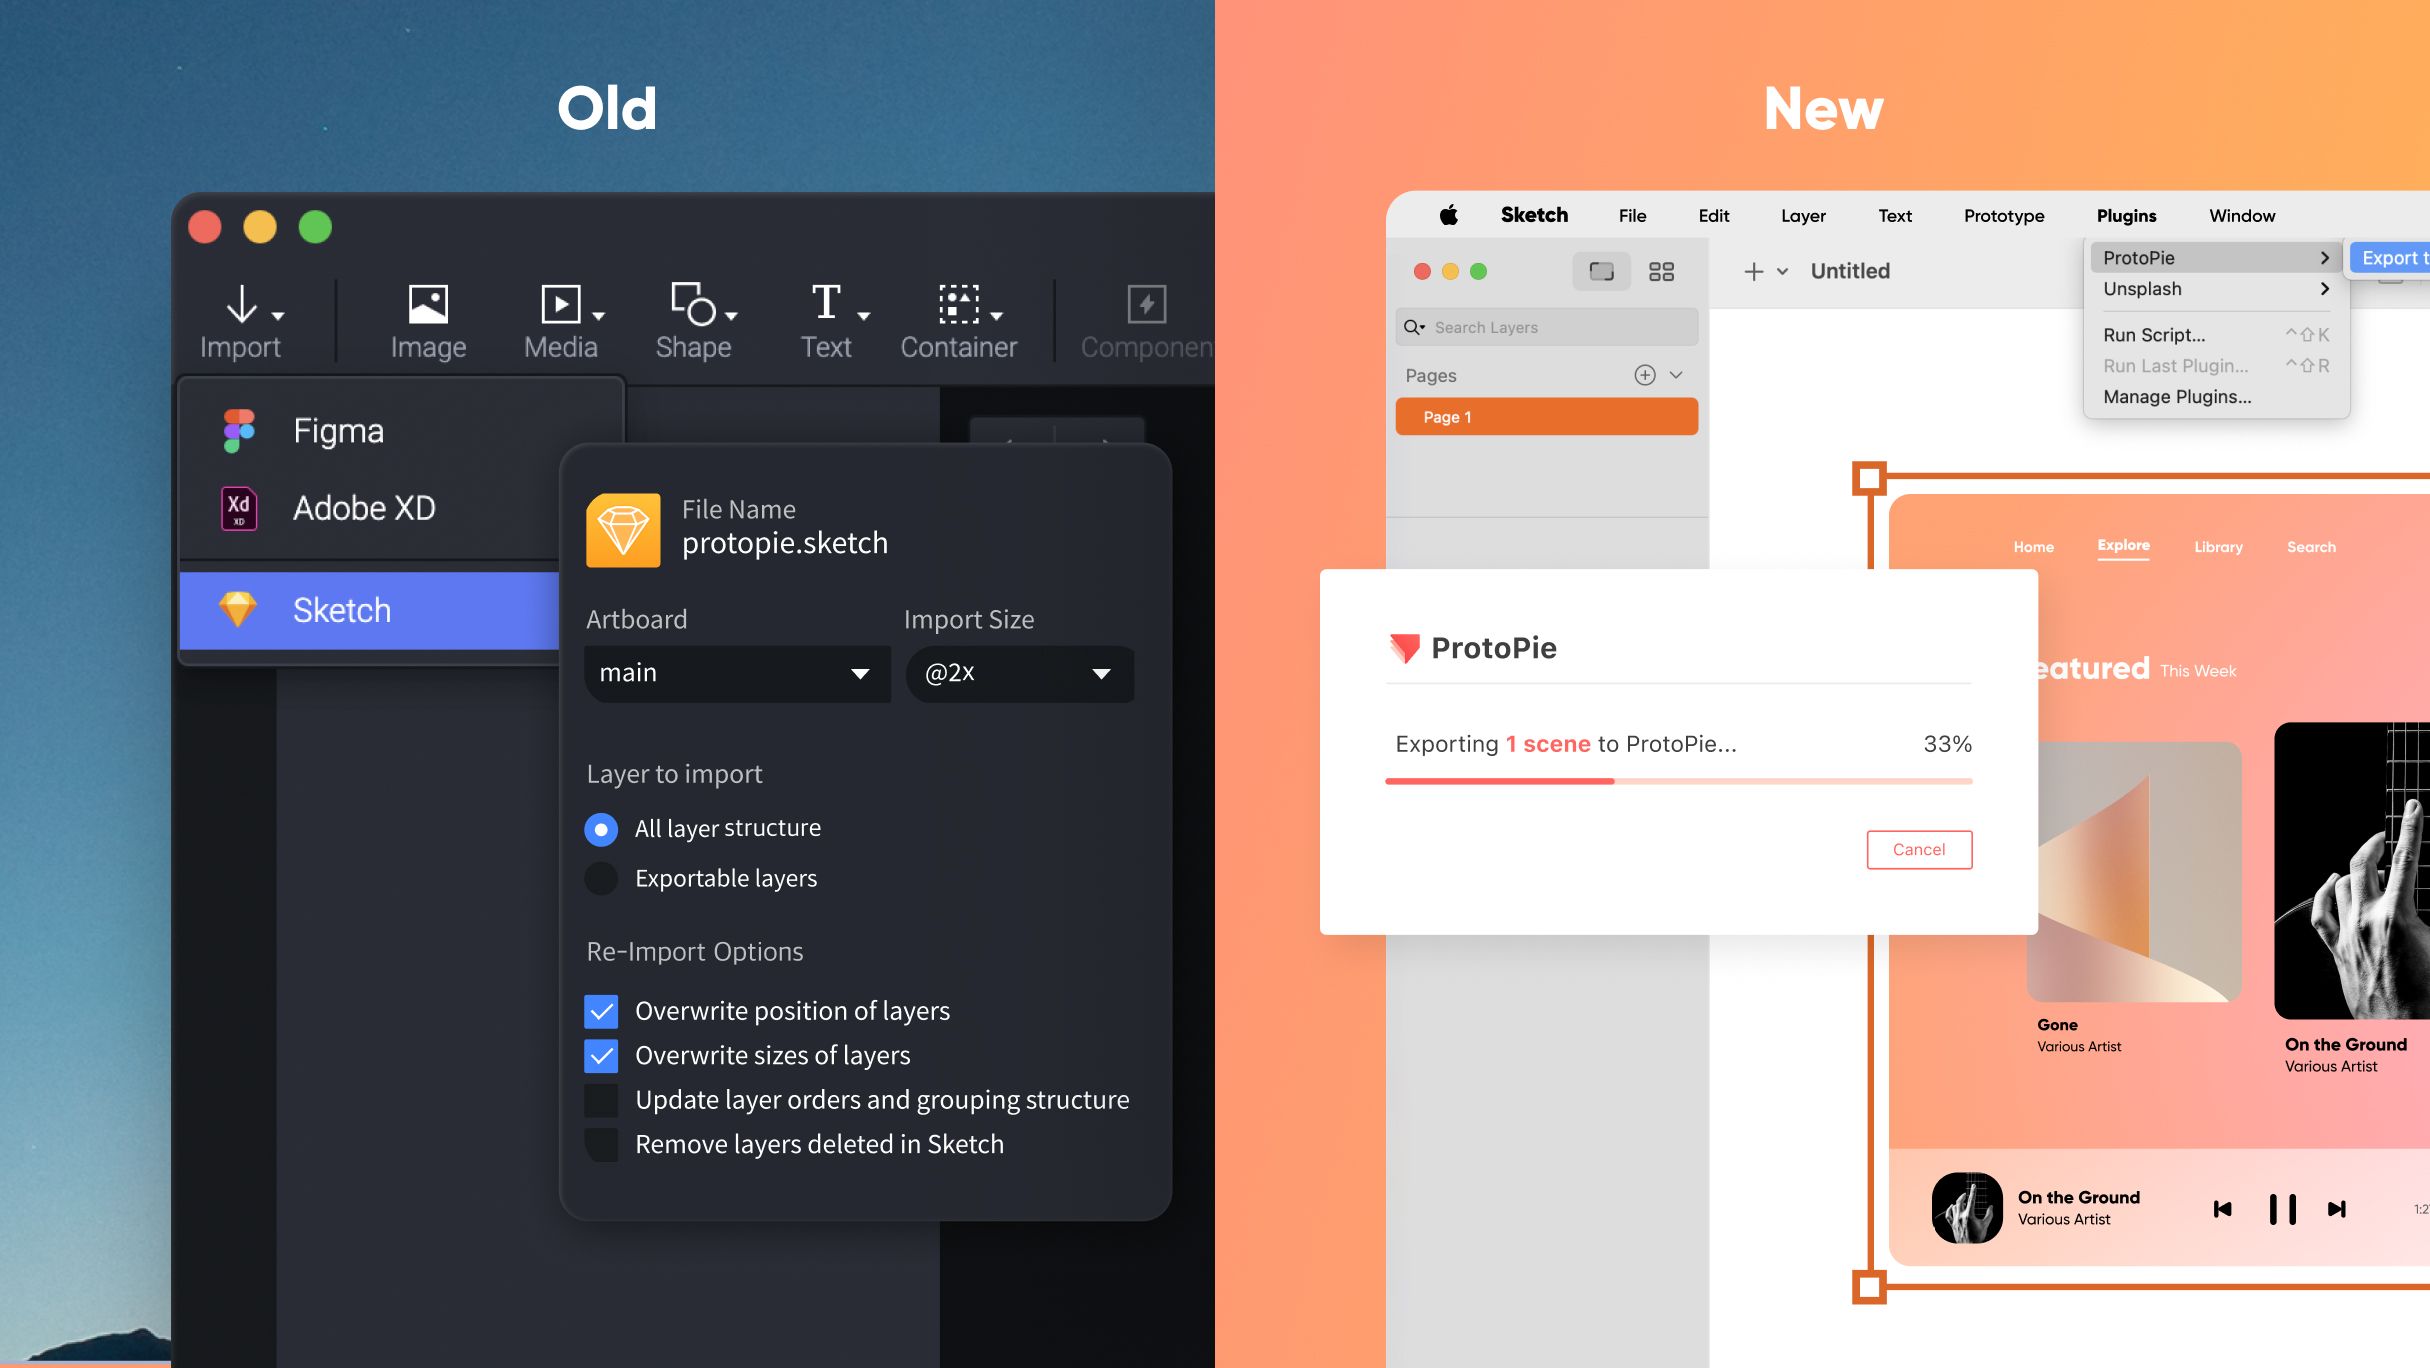 compare the Sketch legacy import(old) and plugin(new)